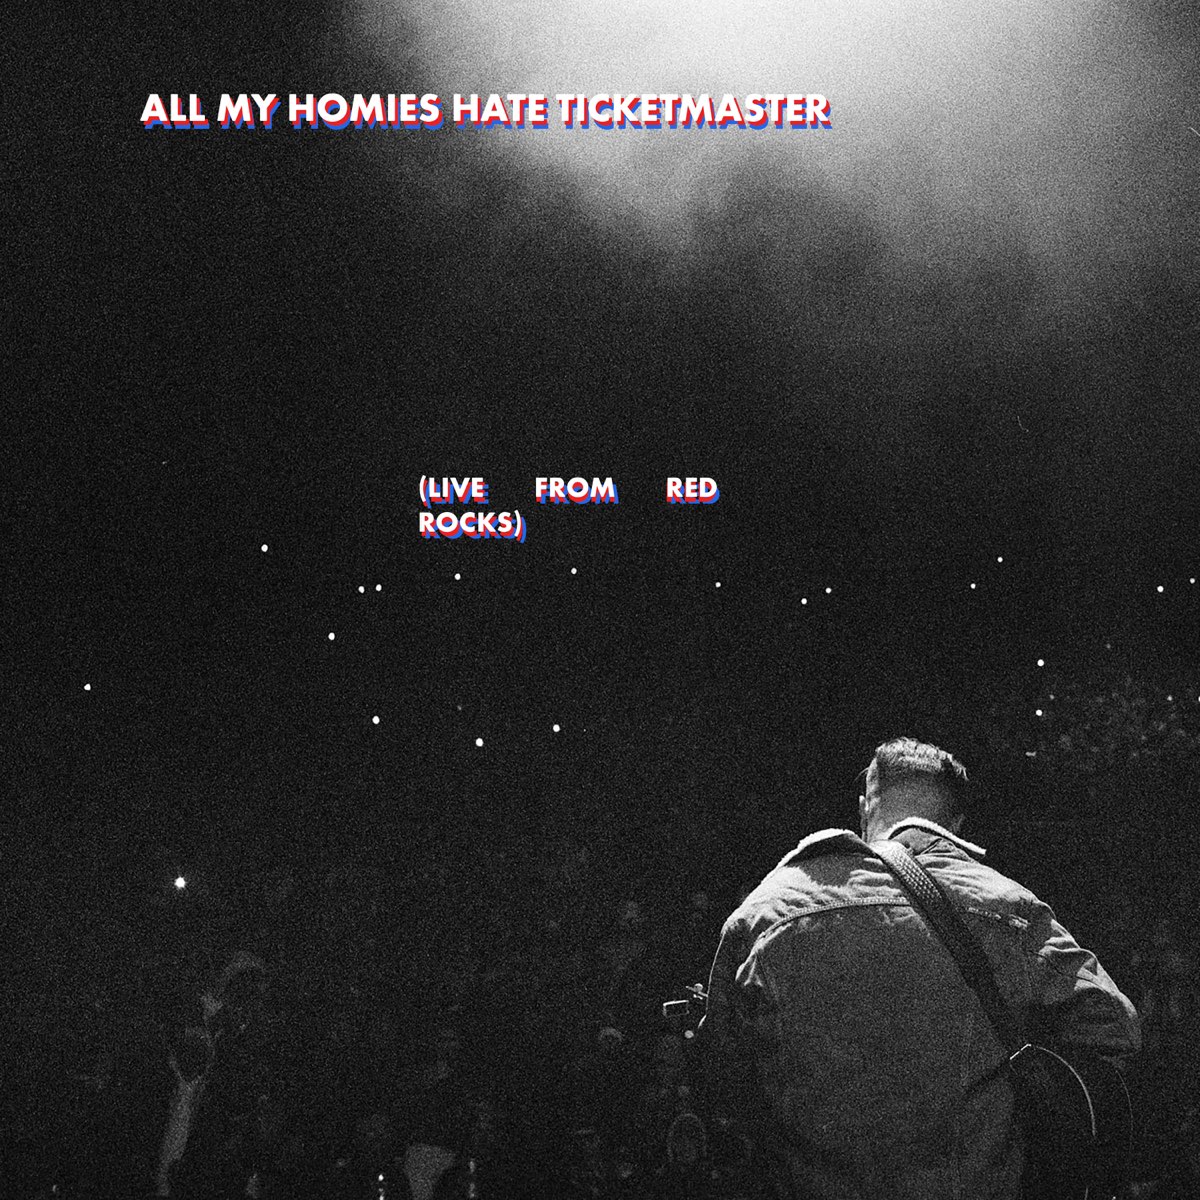 ‎All My Homies Hate Ticketmaster (Live from Red Rocks) by Zach Bryan on